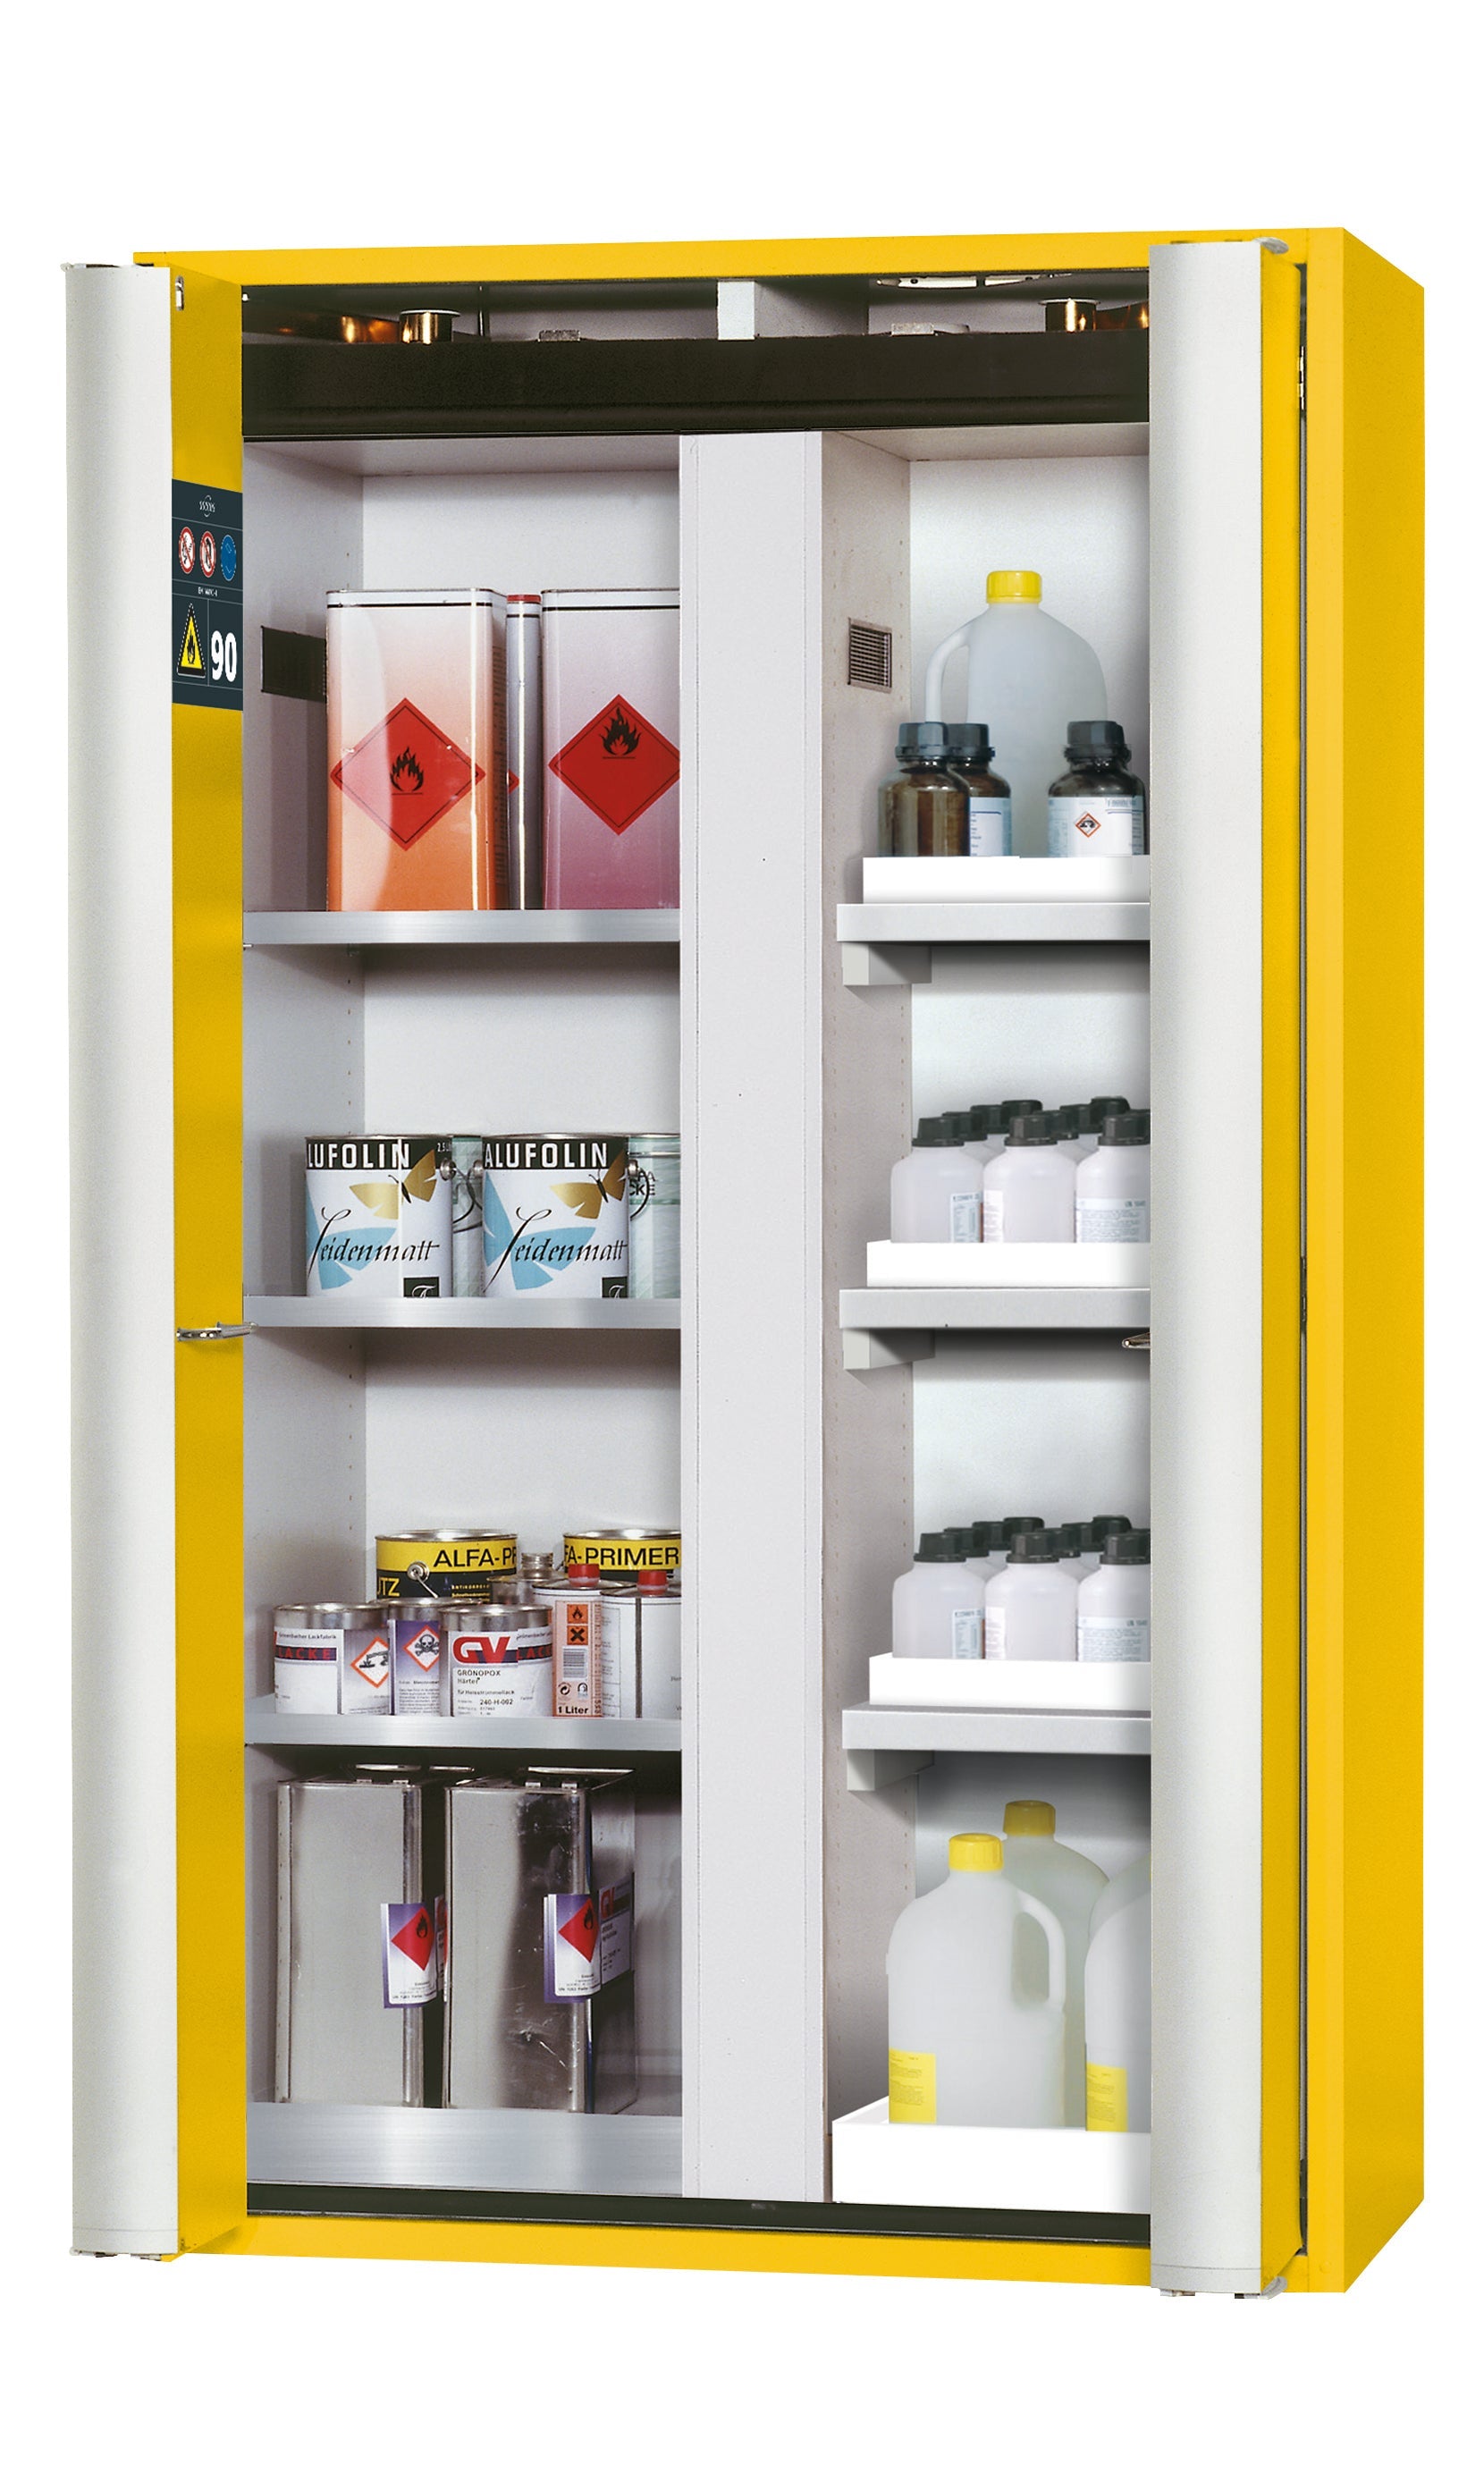 Type 90 safety cabinet S-PHOENIX-90 model S90.196.120.MV.FDAS in safety yellow RAL 1004 with 3x standard shelves (stainless steel 1.4301)